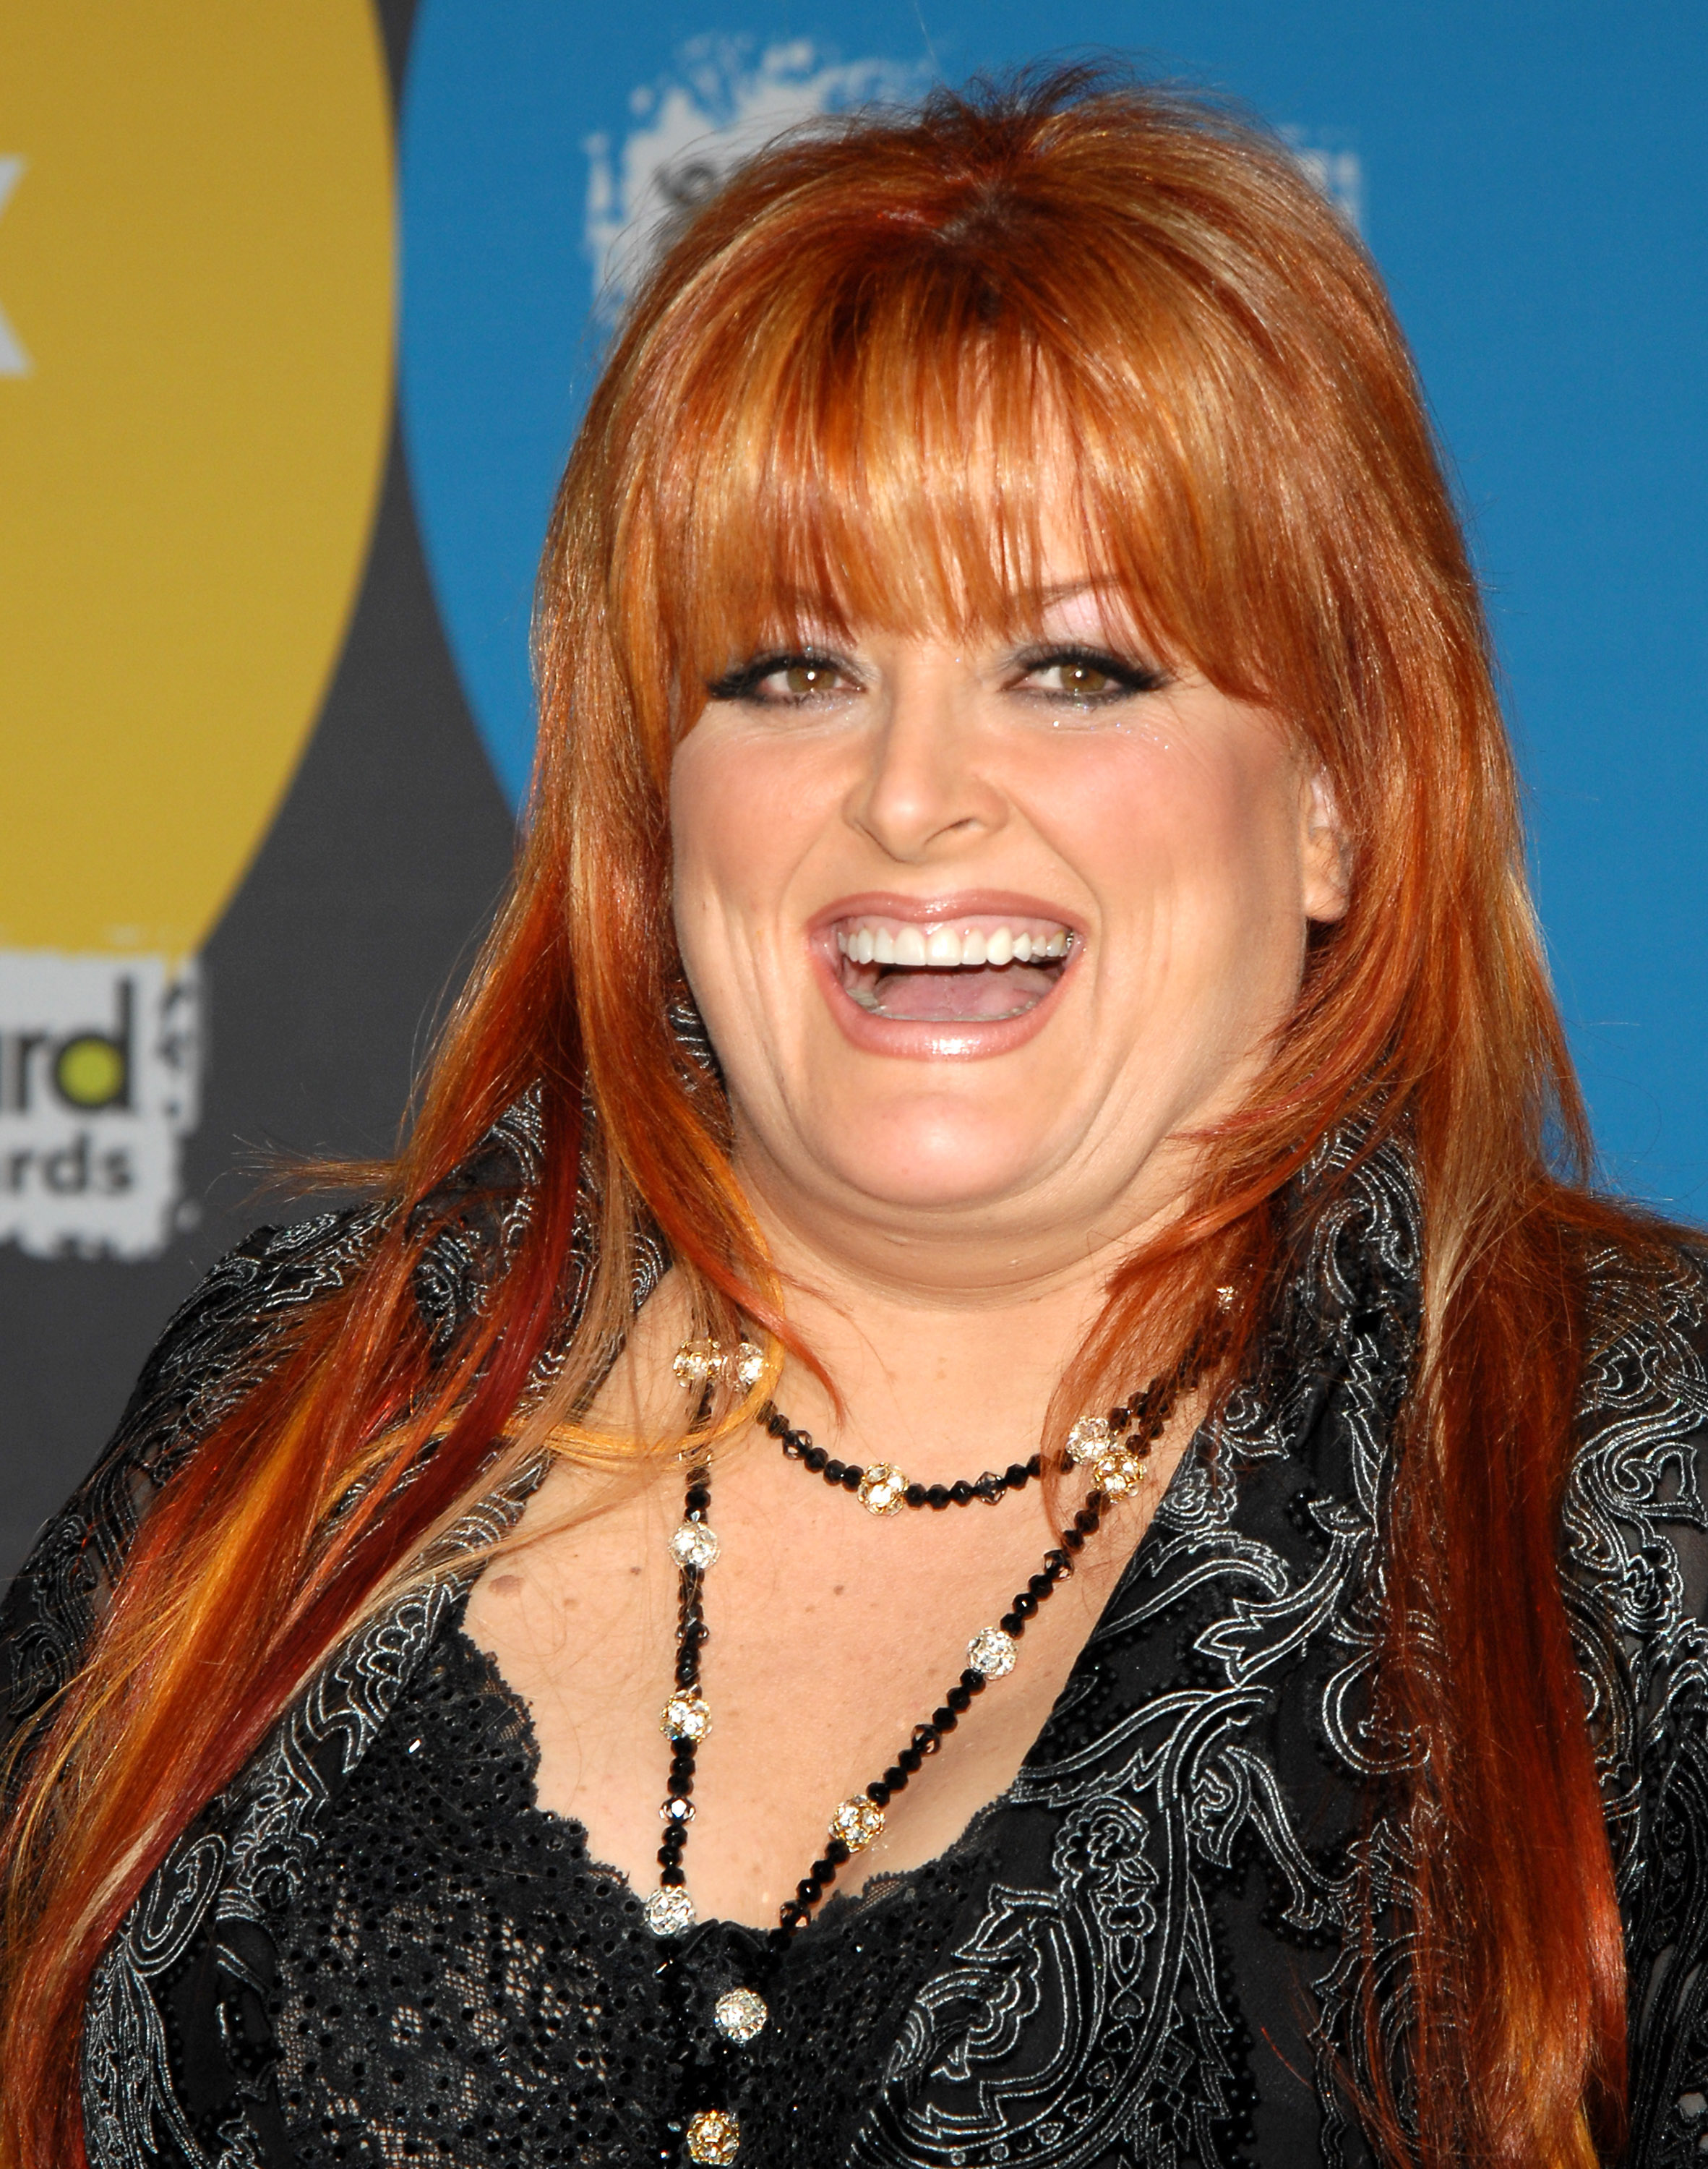 Wynonna Judd attends the 2006 Billboard Music Awards in Las Vegas, Nevada | Source: Getty Images